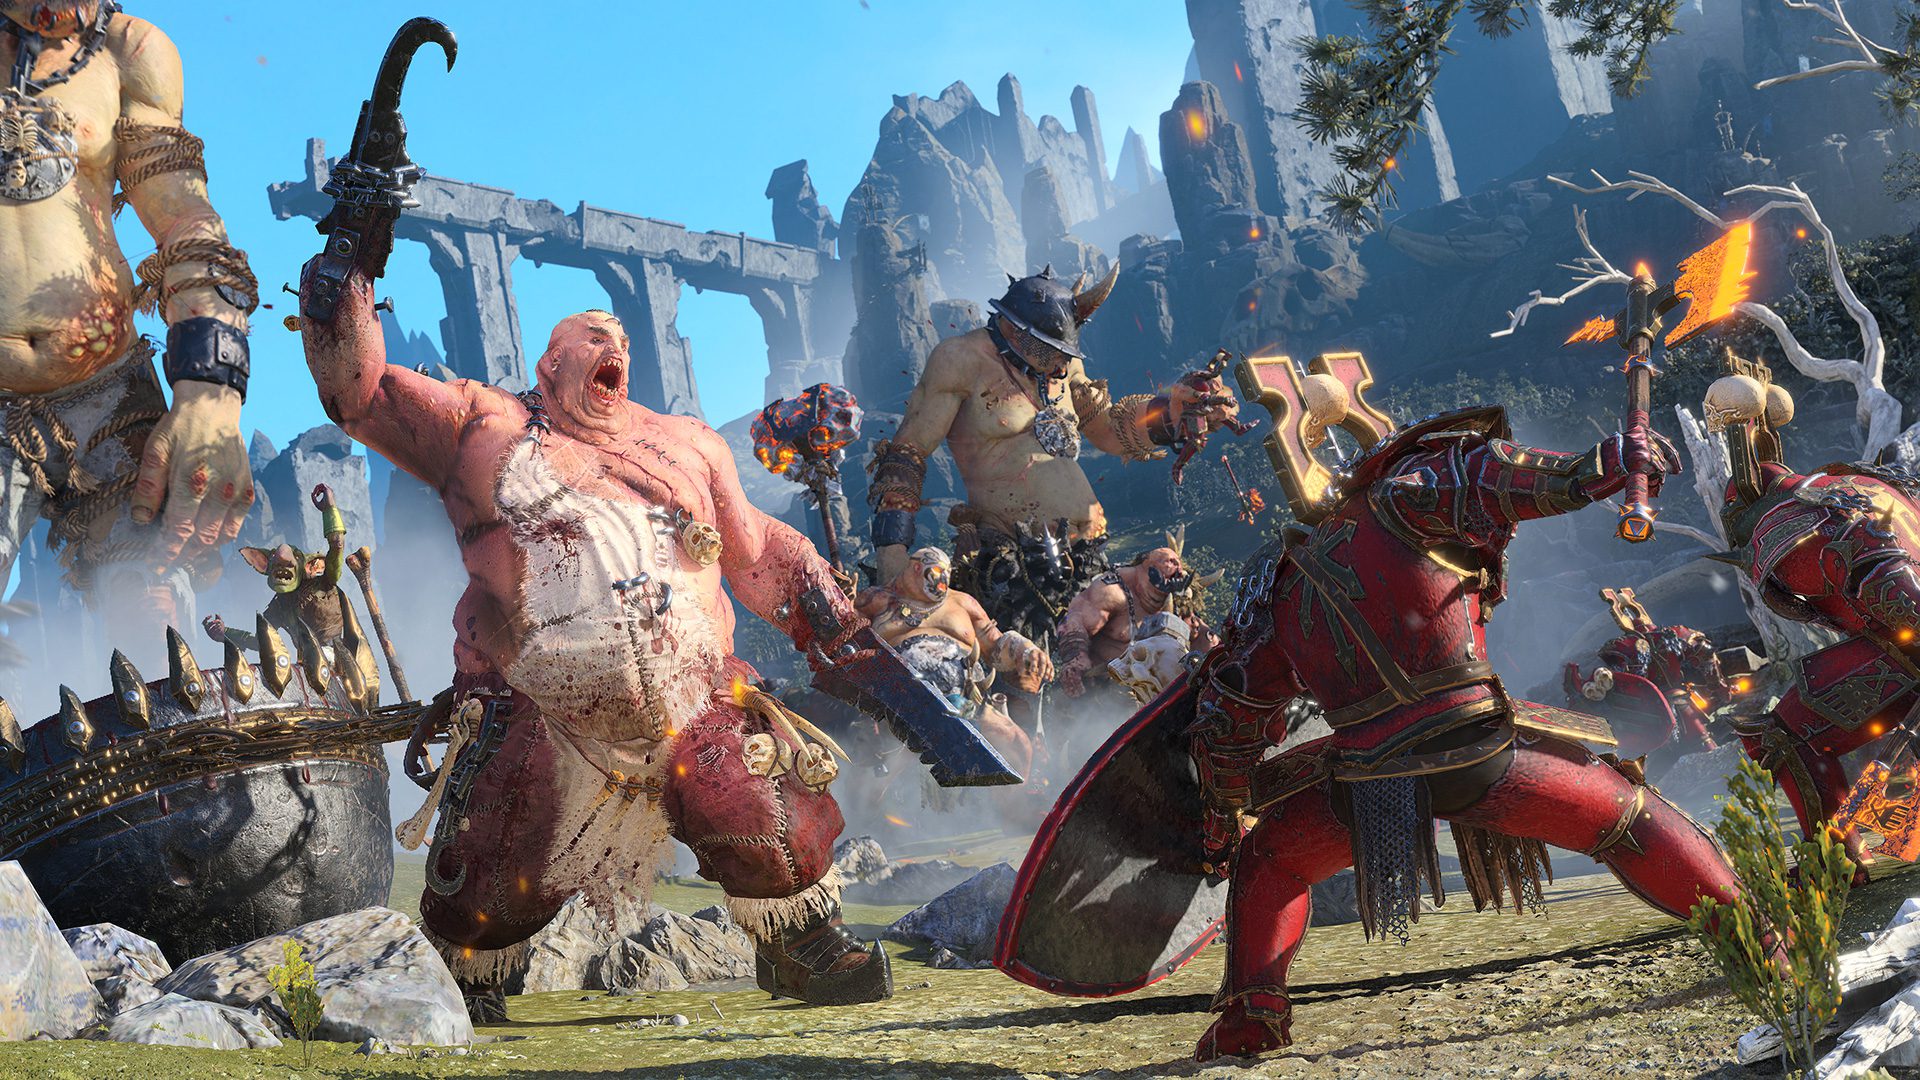 Ogres fighting in Total War: Warhammer III, which is releasing for PC Game Pass on February 17, 2022